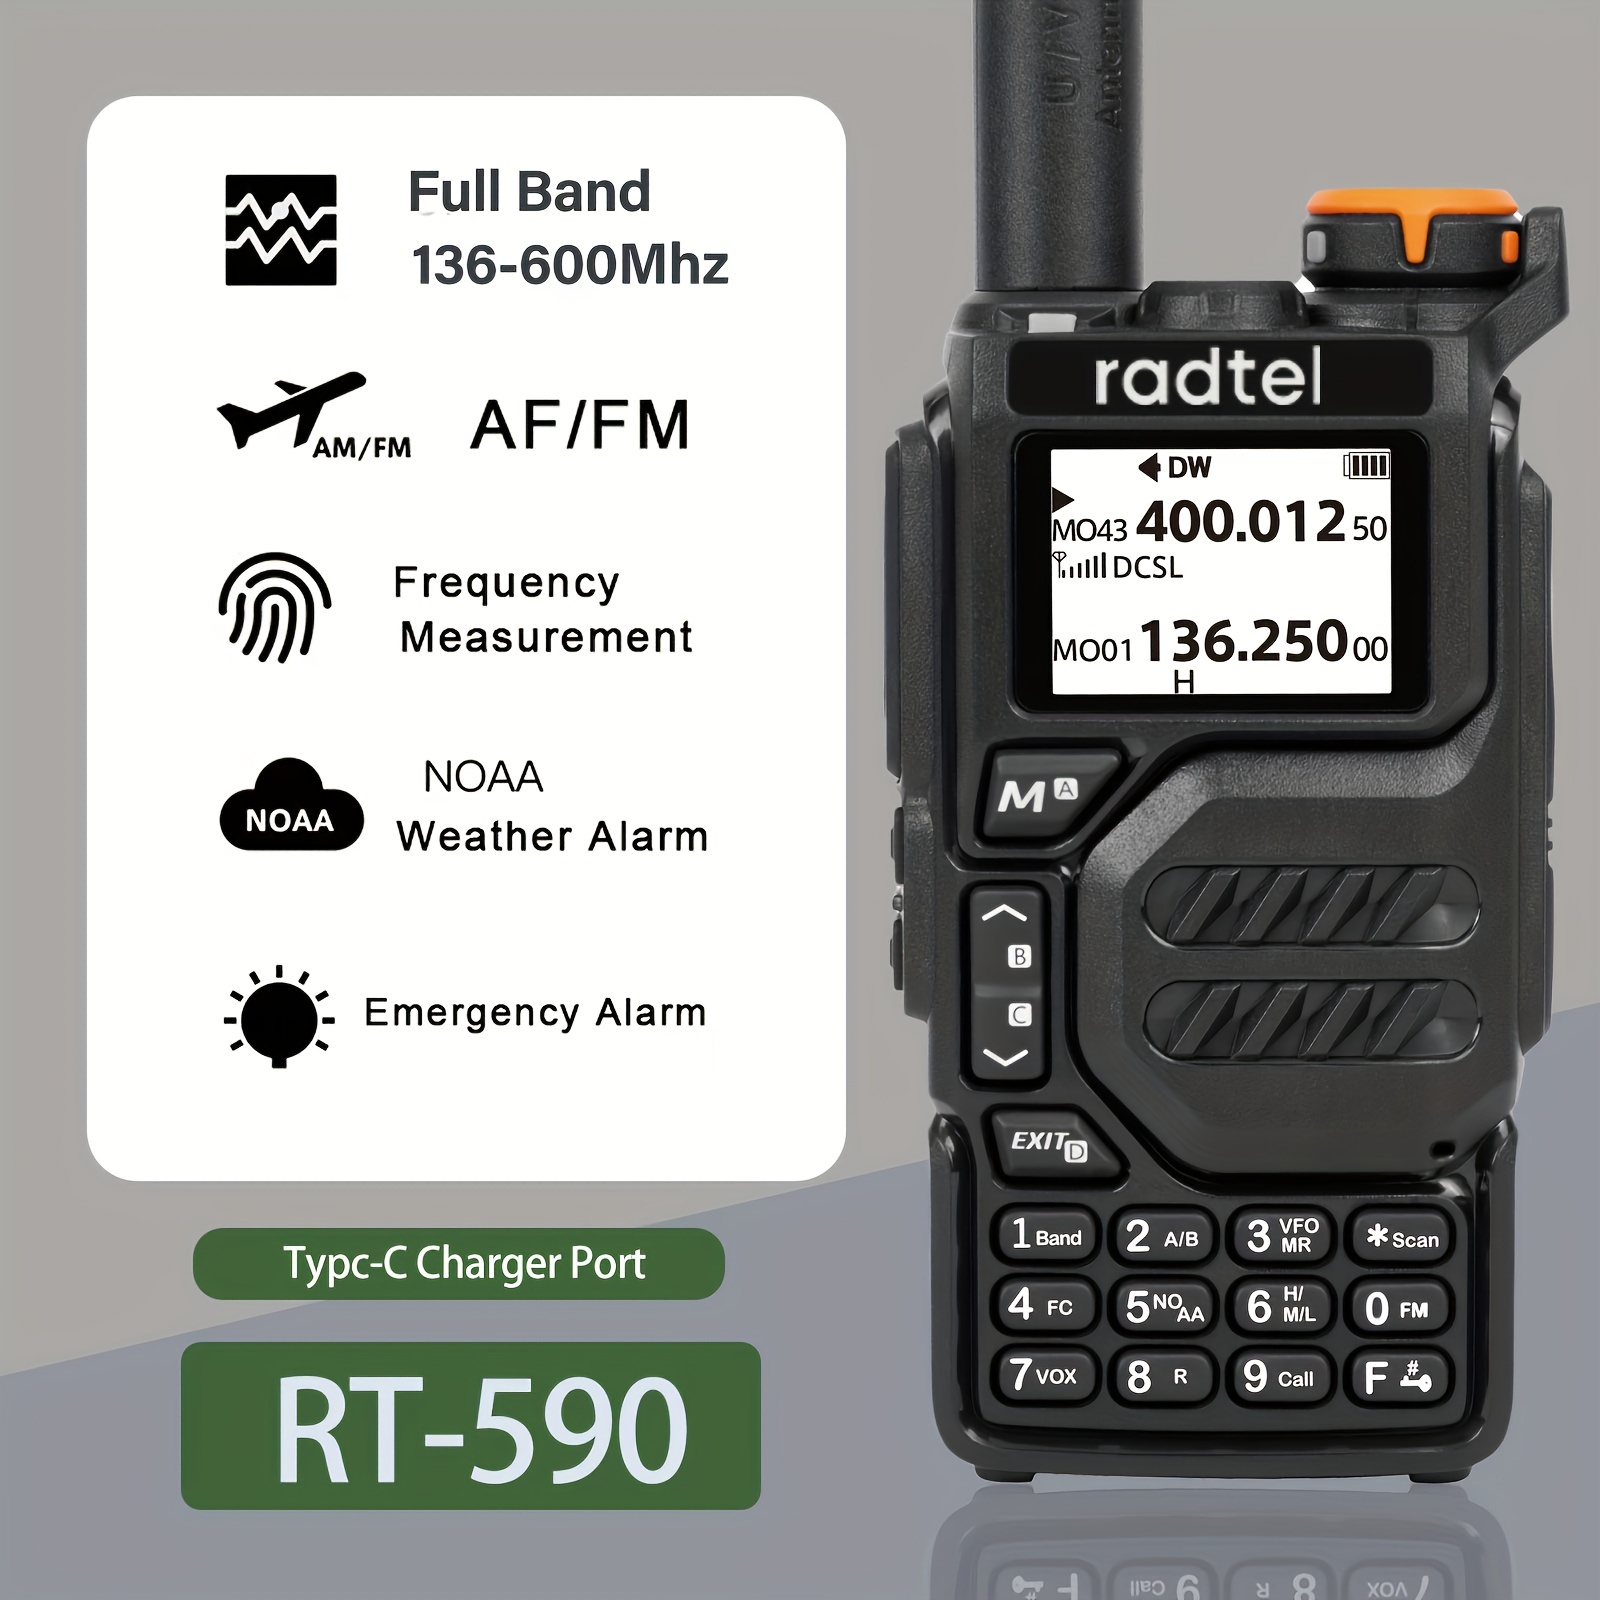 Radtel Rt-590 136-600mhz Air Band Walkie Talkie Amateur Ham Two Way Radio Uhf Vhf 200ch Full Band Ht With Noaa Channel Am pic